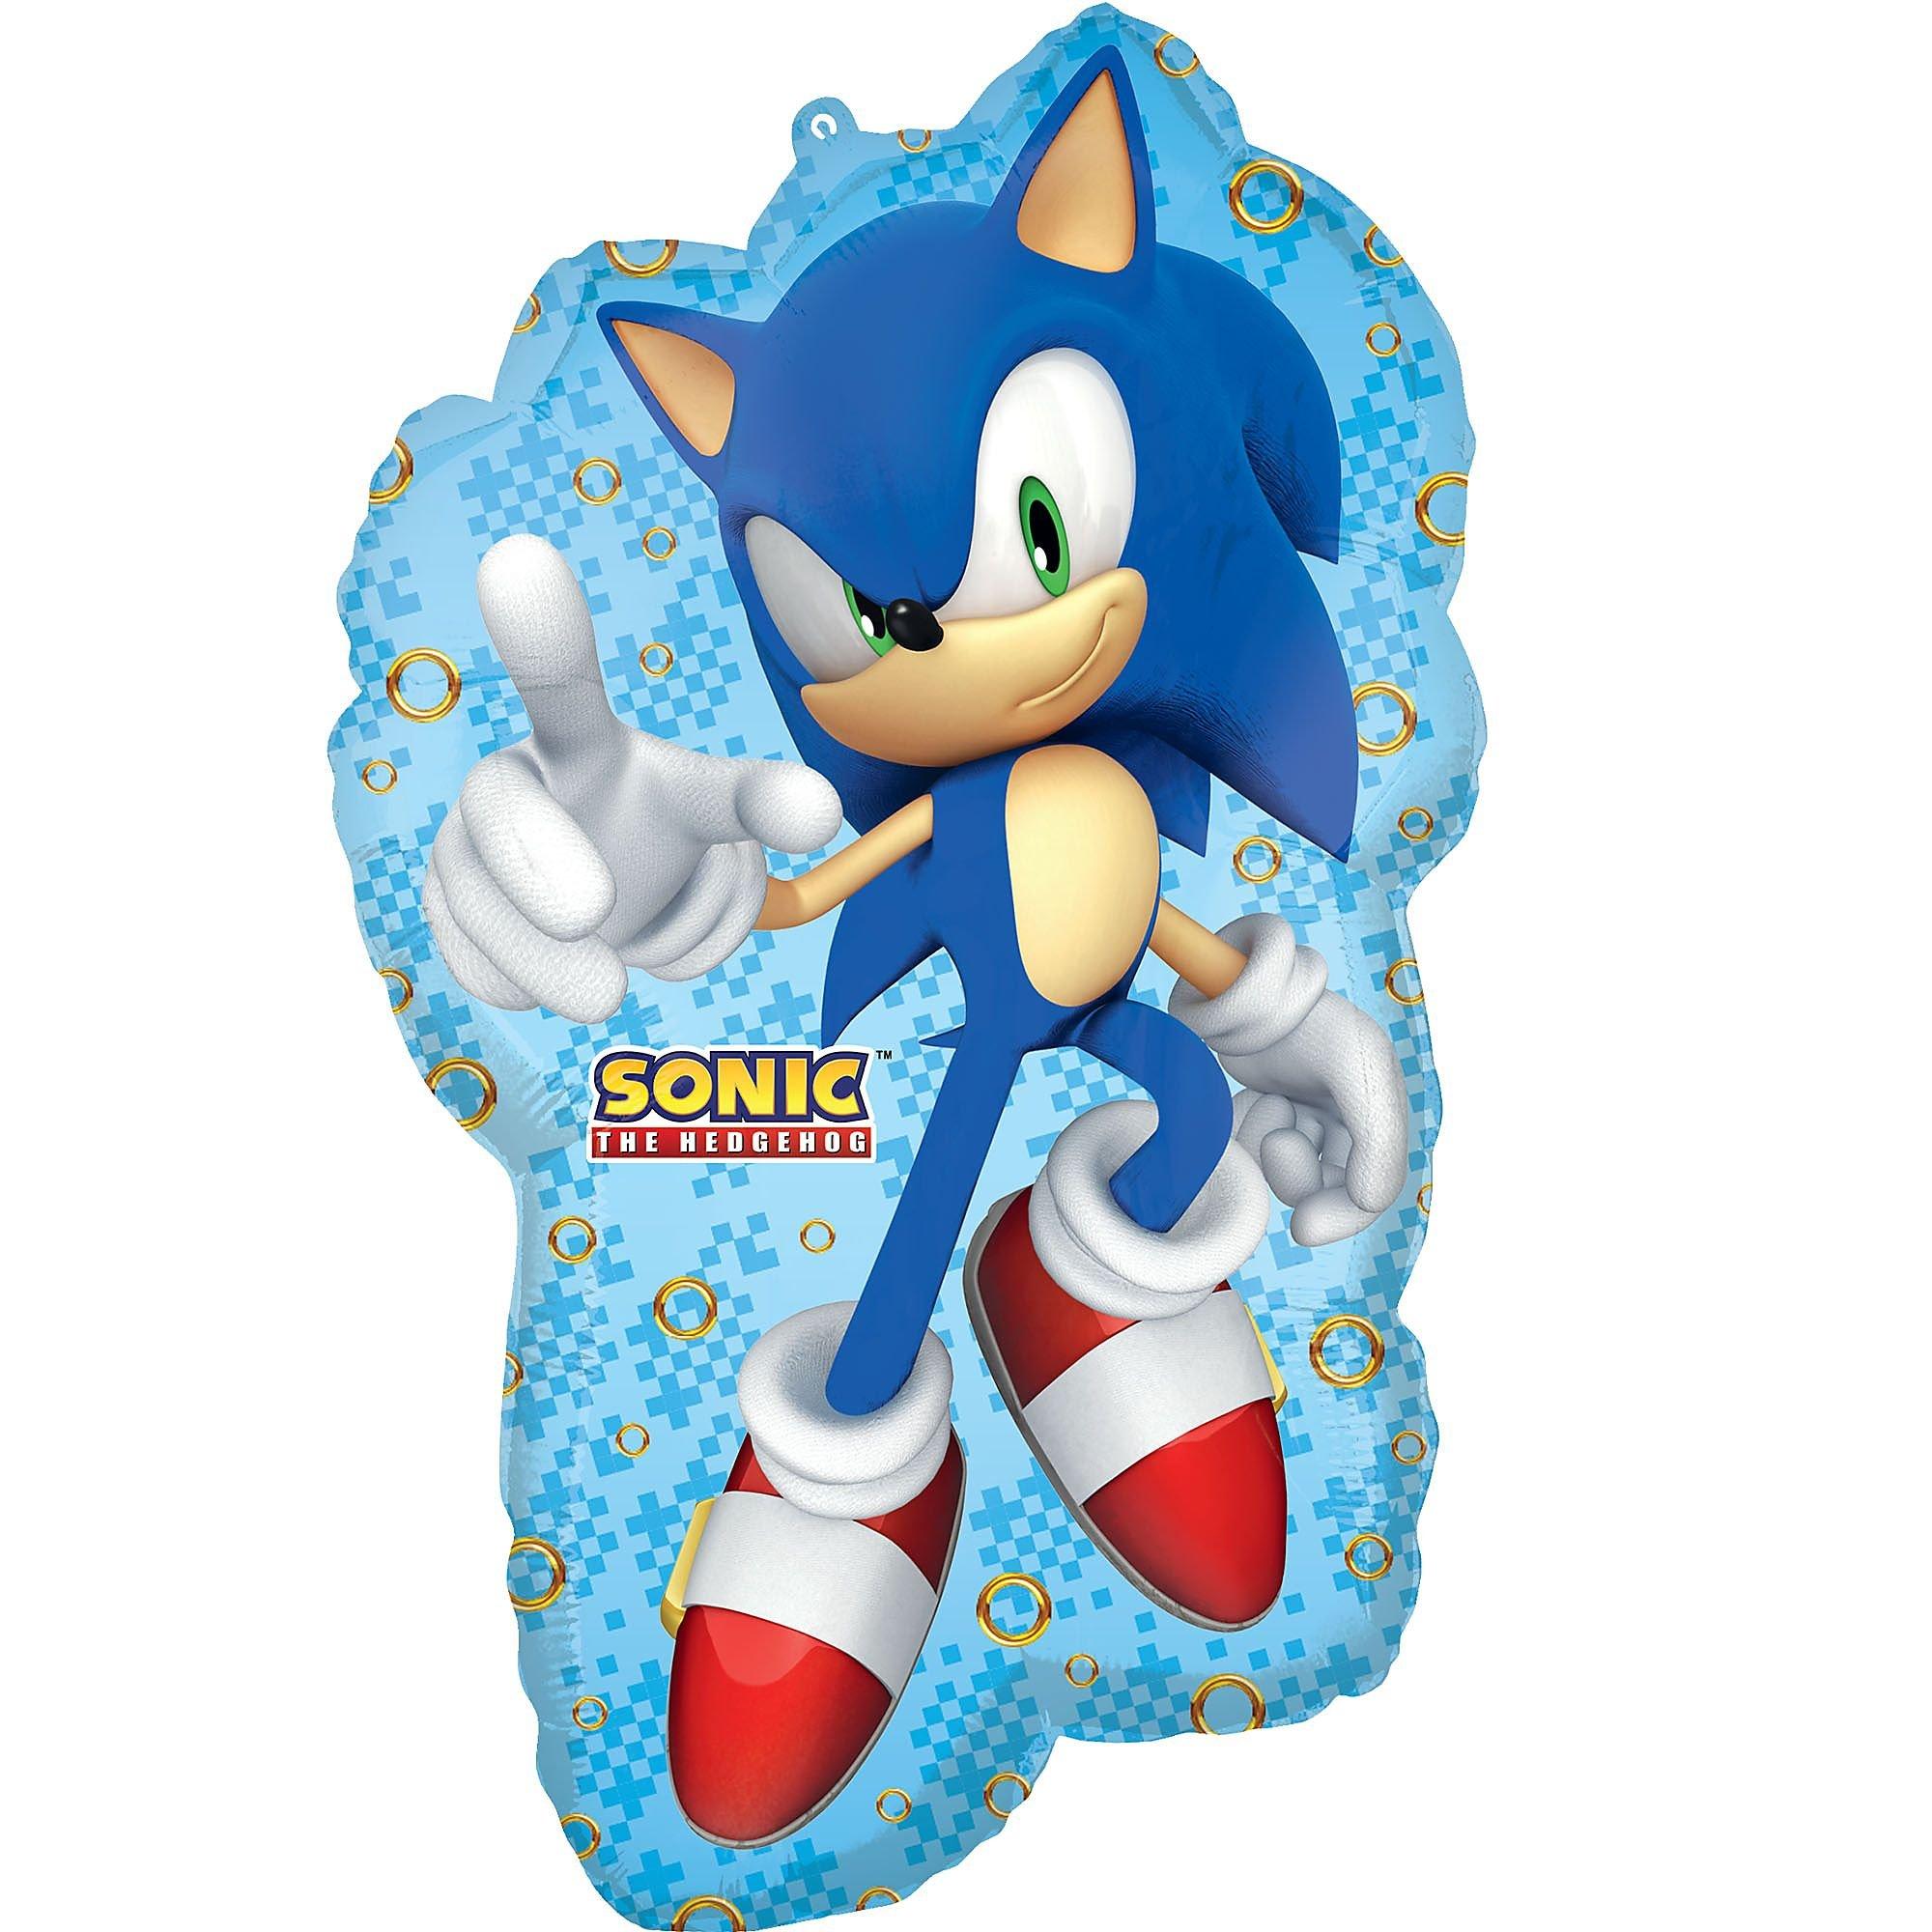  Party City Sonic the Hedgehog Pull String Pinata, Party  Supplies, 2 lbs. Capacity, 19.2” W x 3” D x 16.75” H : Toys & Games